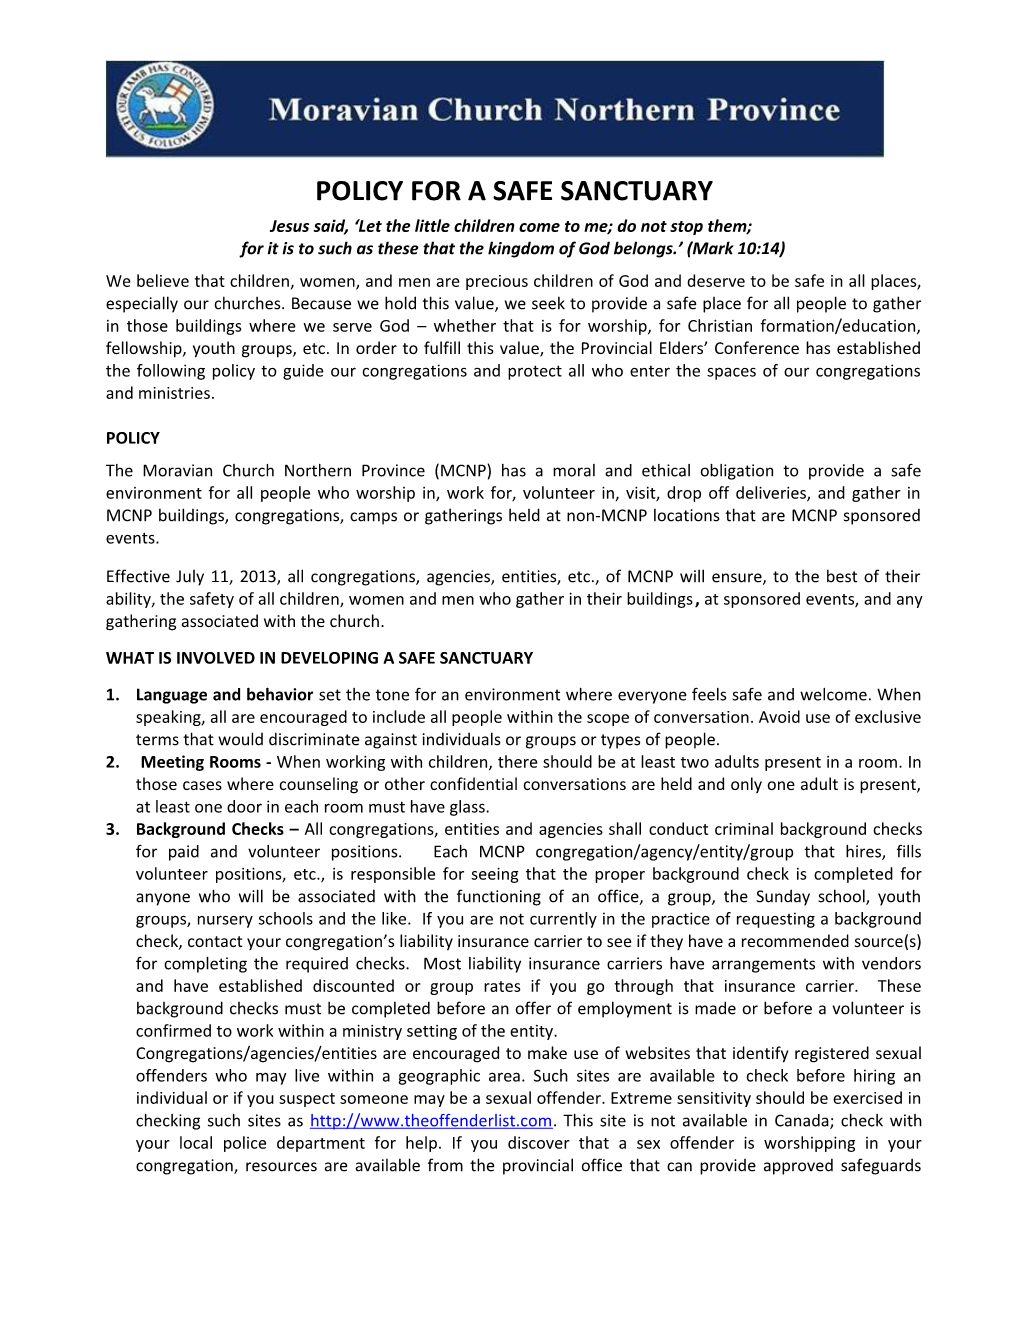 Policy for a Safe Sanctuary